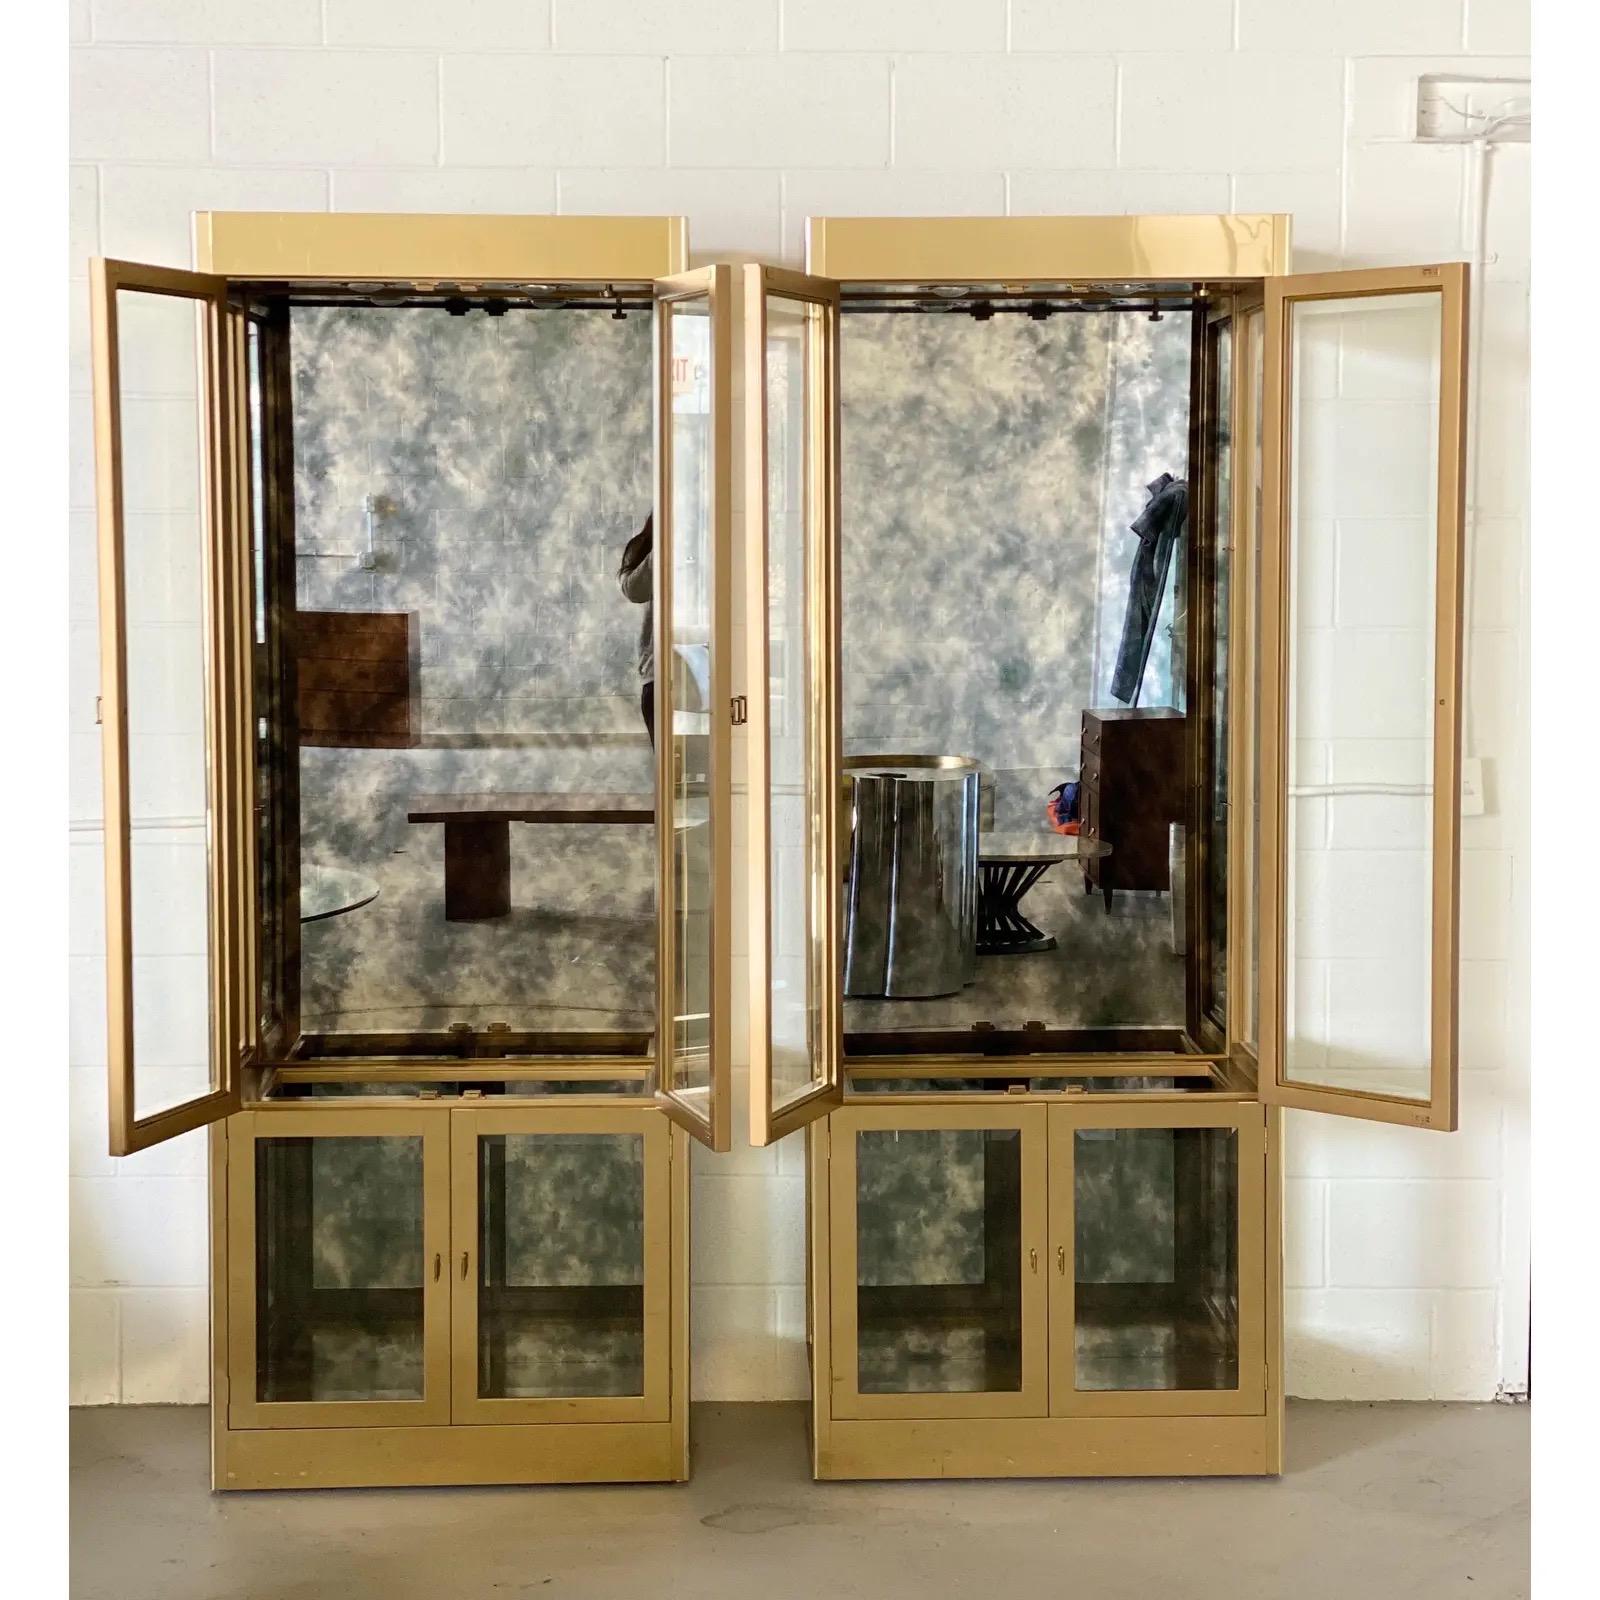 We are very pleased to offer an extraordinary, sophisticated, set of display cases by Mastercraft, circa the 1970s. These highly desirable pieces feature lacquered brass, beveled glass on all doors and side panels and an antique finish mirror